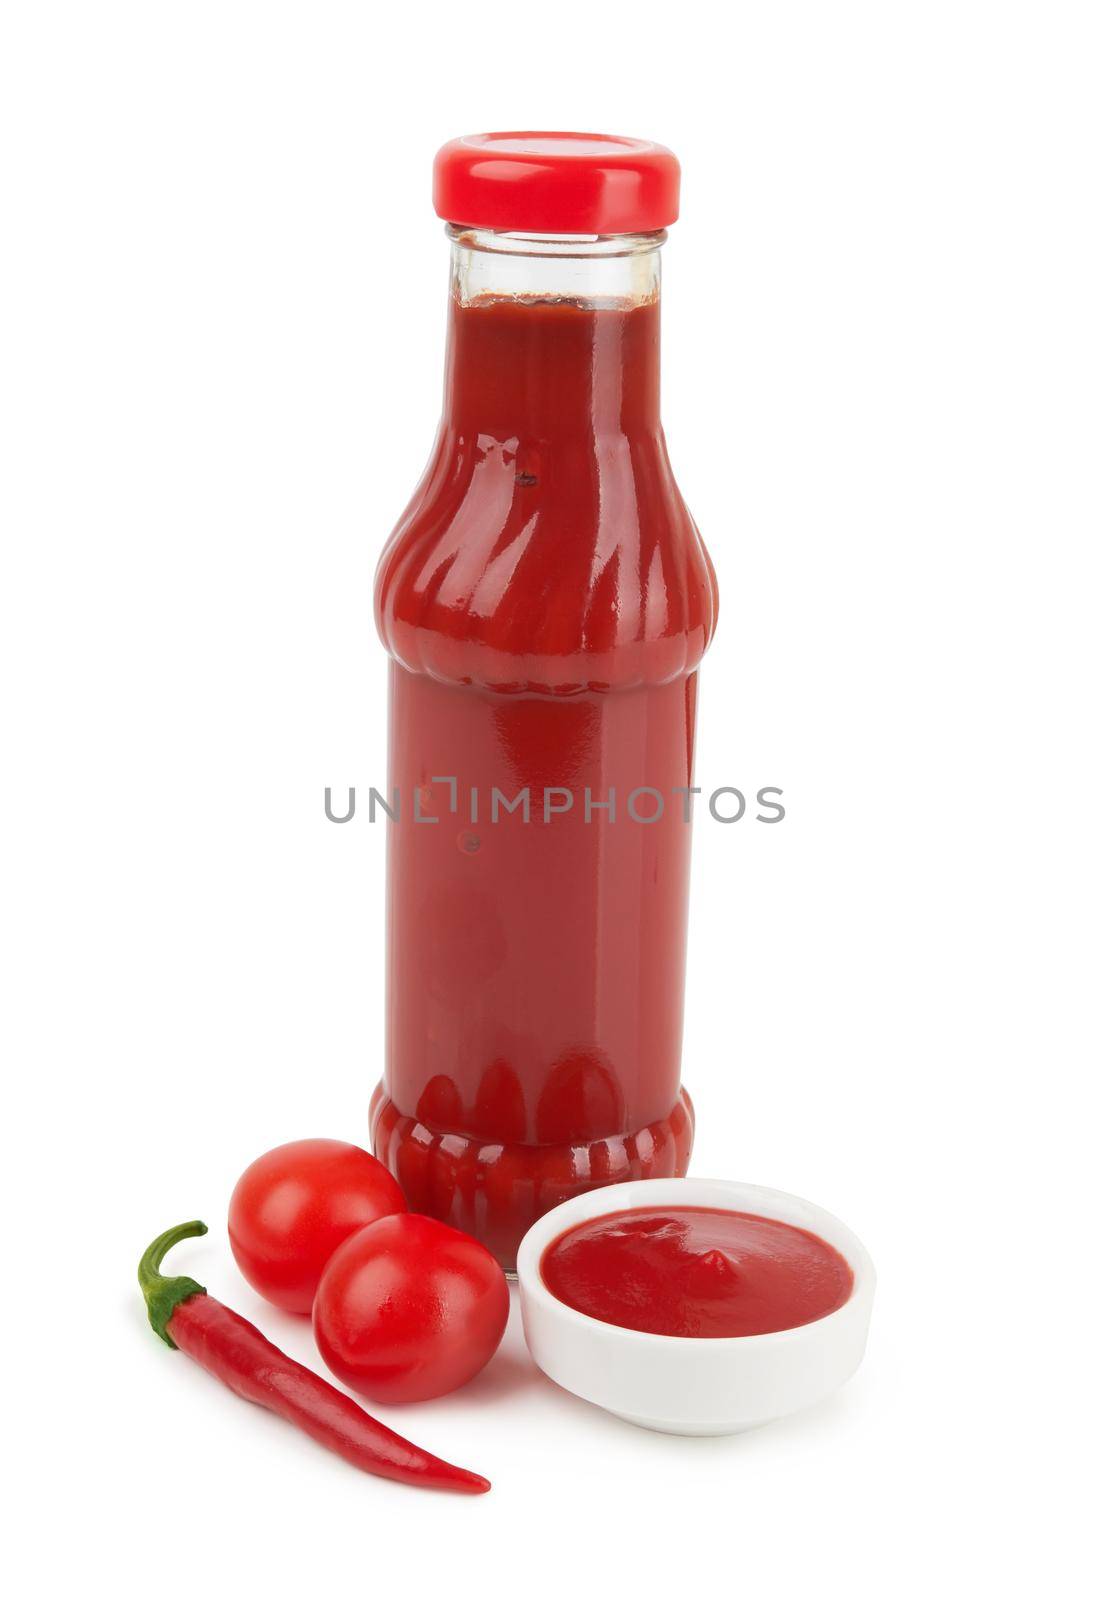 Bottle of tomato sauce or ketchup isolated on white background